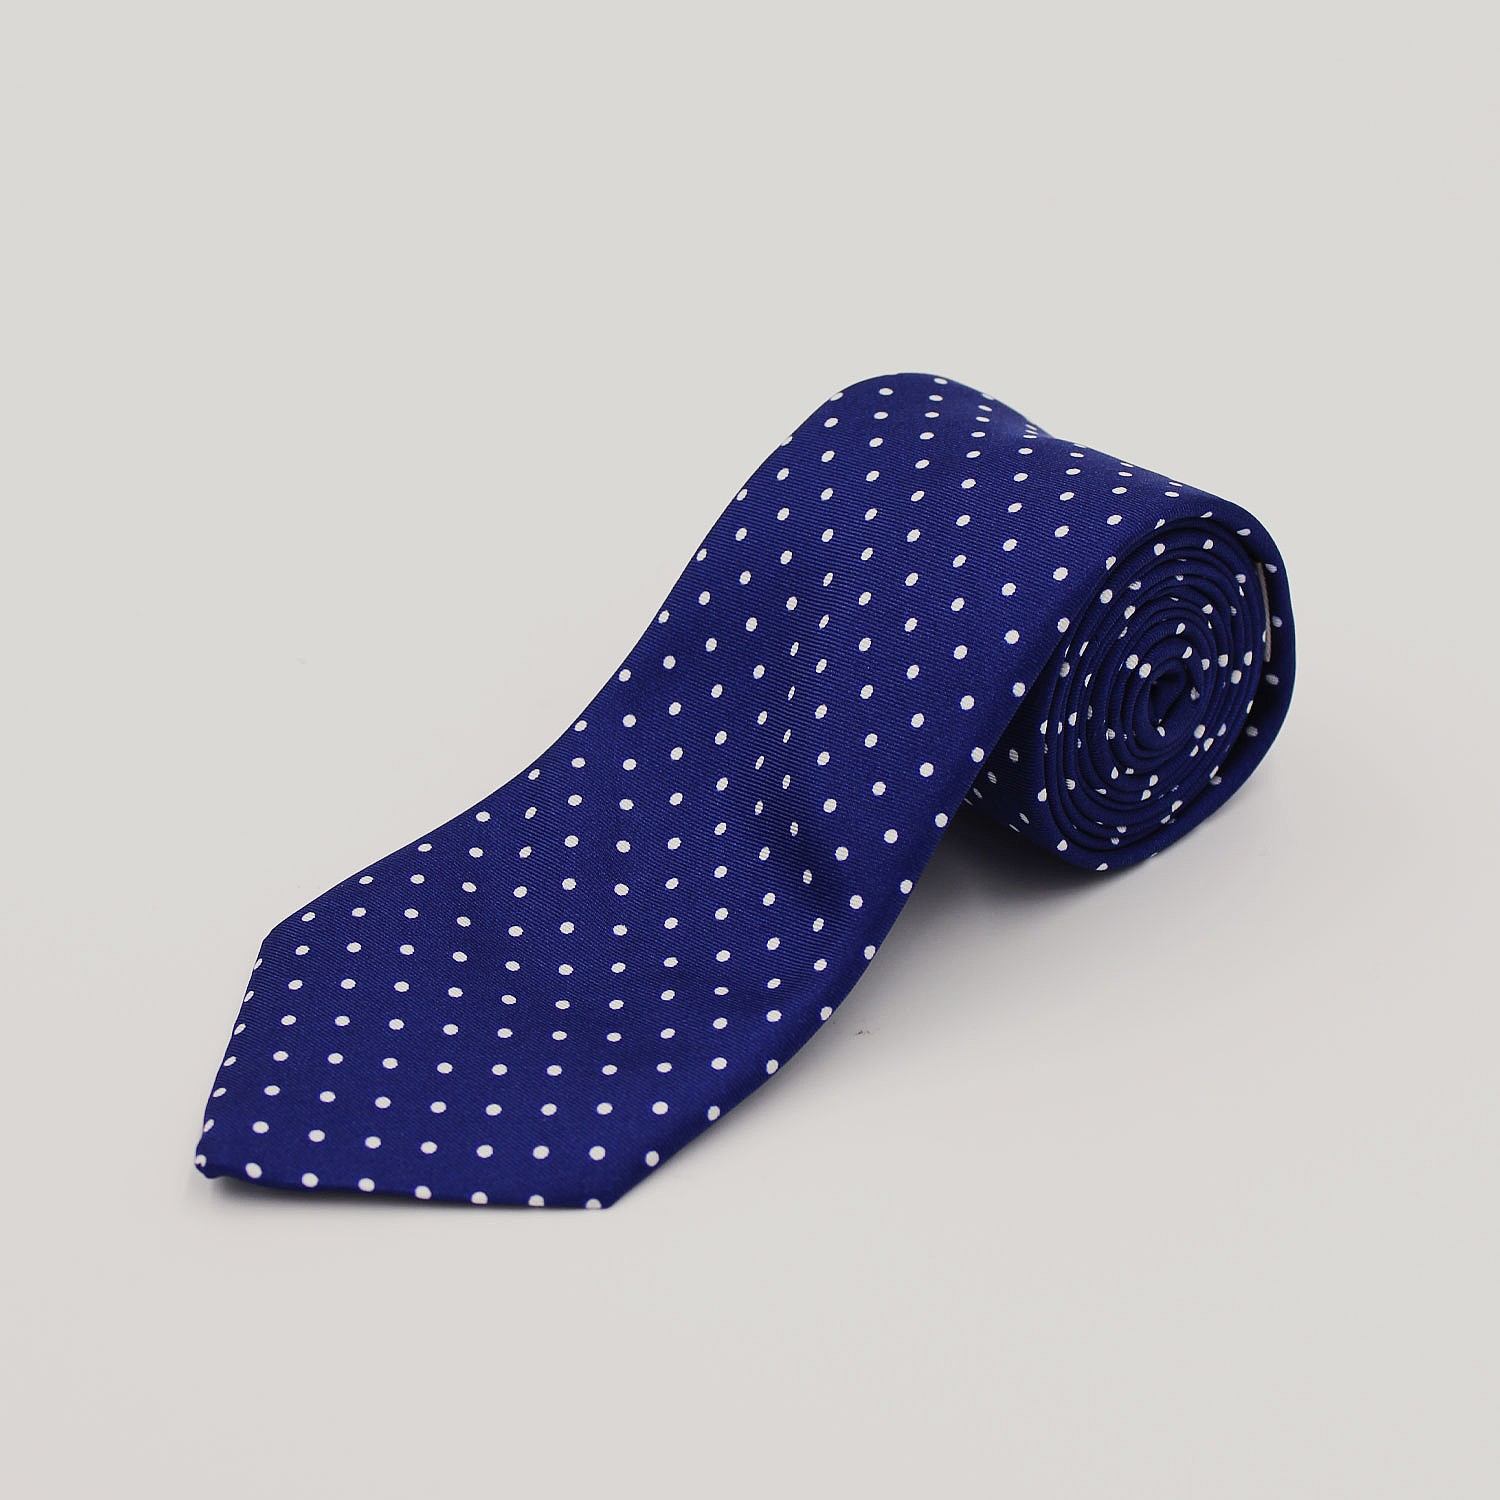 What Your Tie Says About You | Tie Options For Men